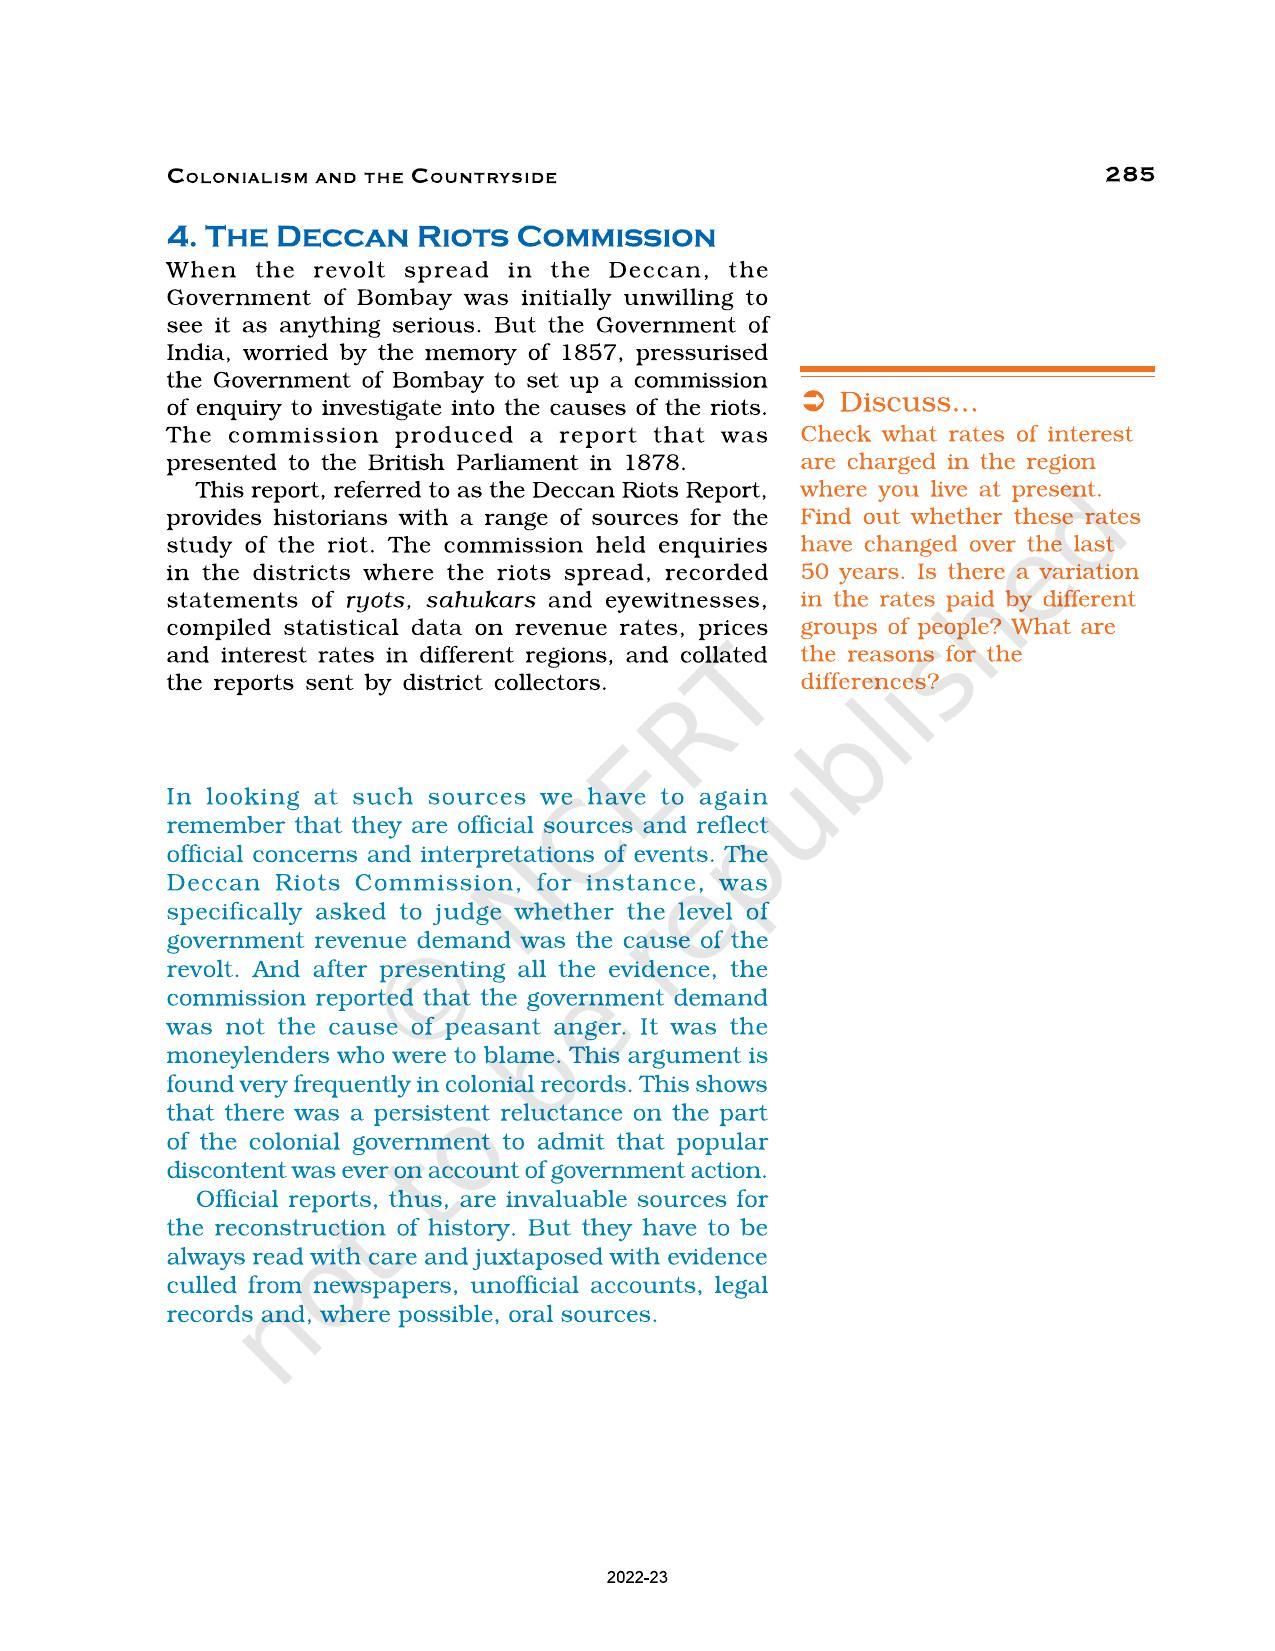 NCERT Book for Class 12 History (Part-II) Chapter 10 Colonialism and the Countryside - Page 29